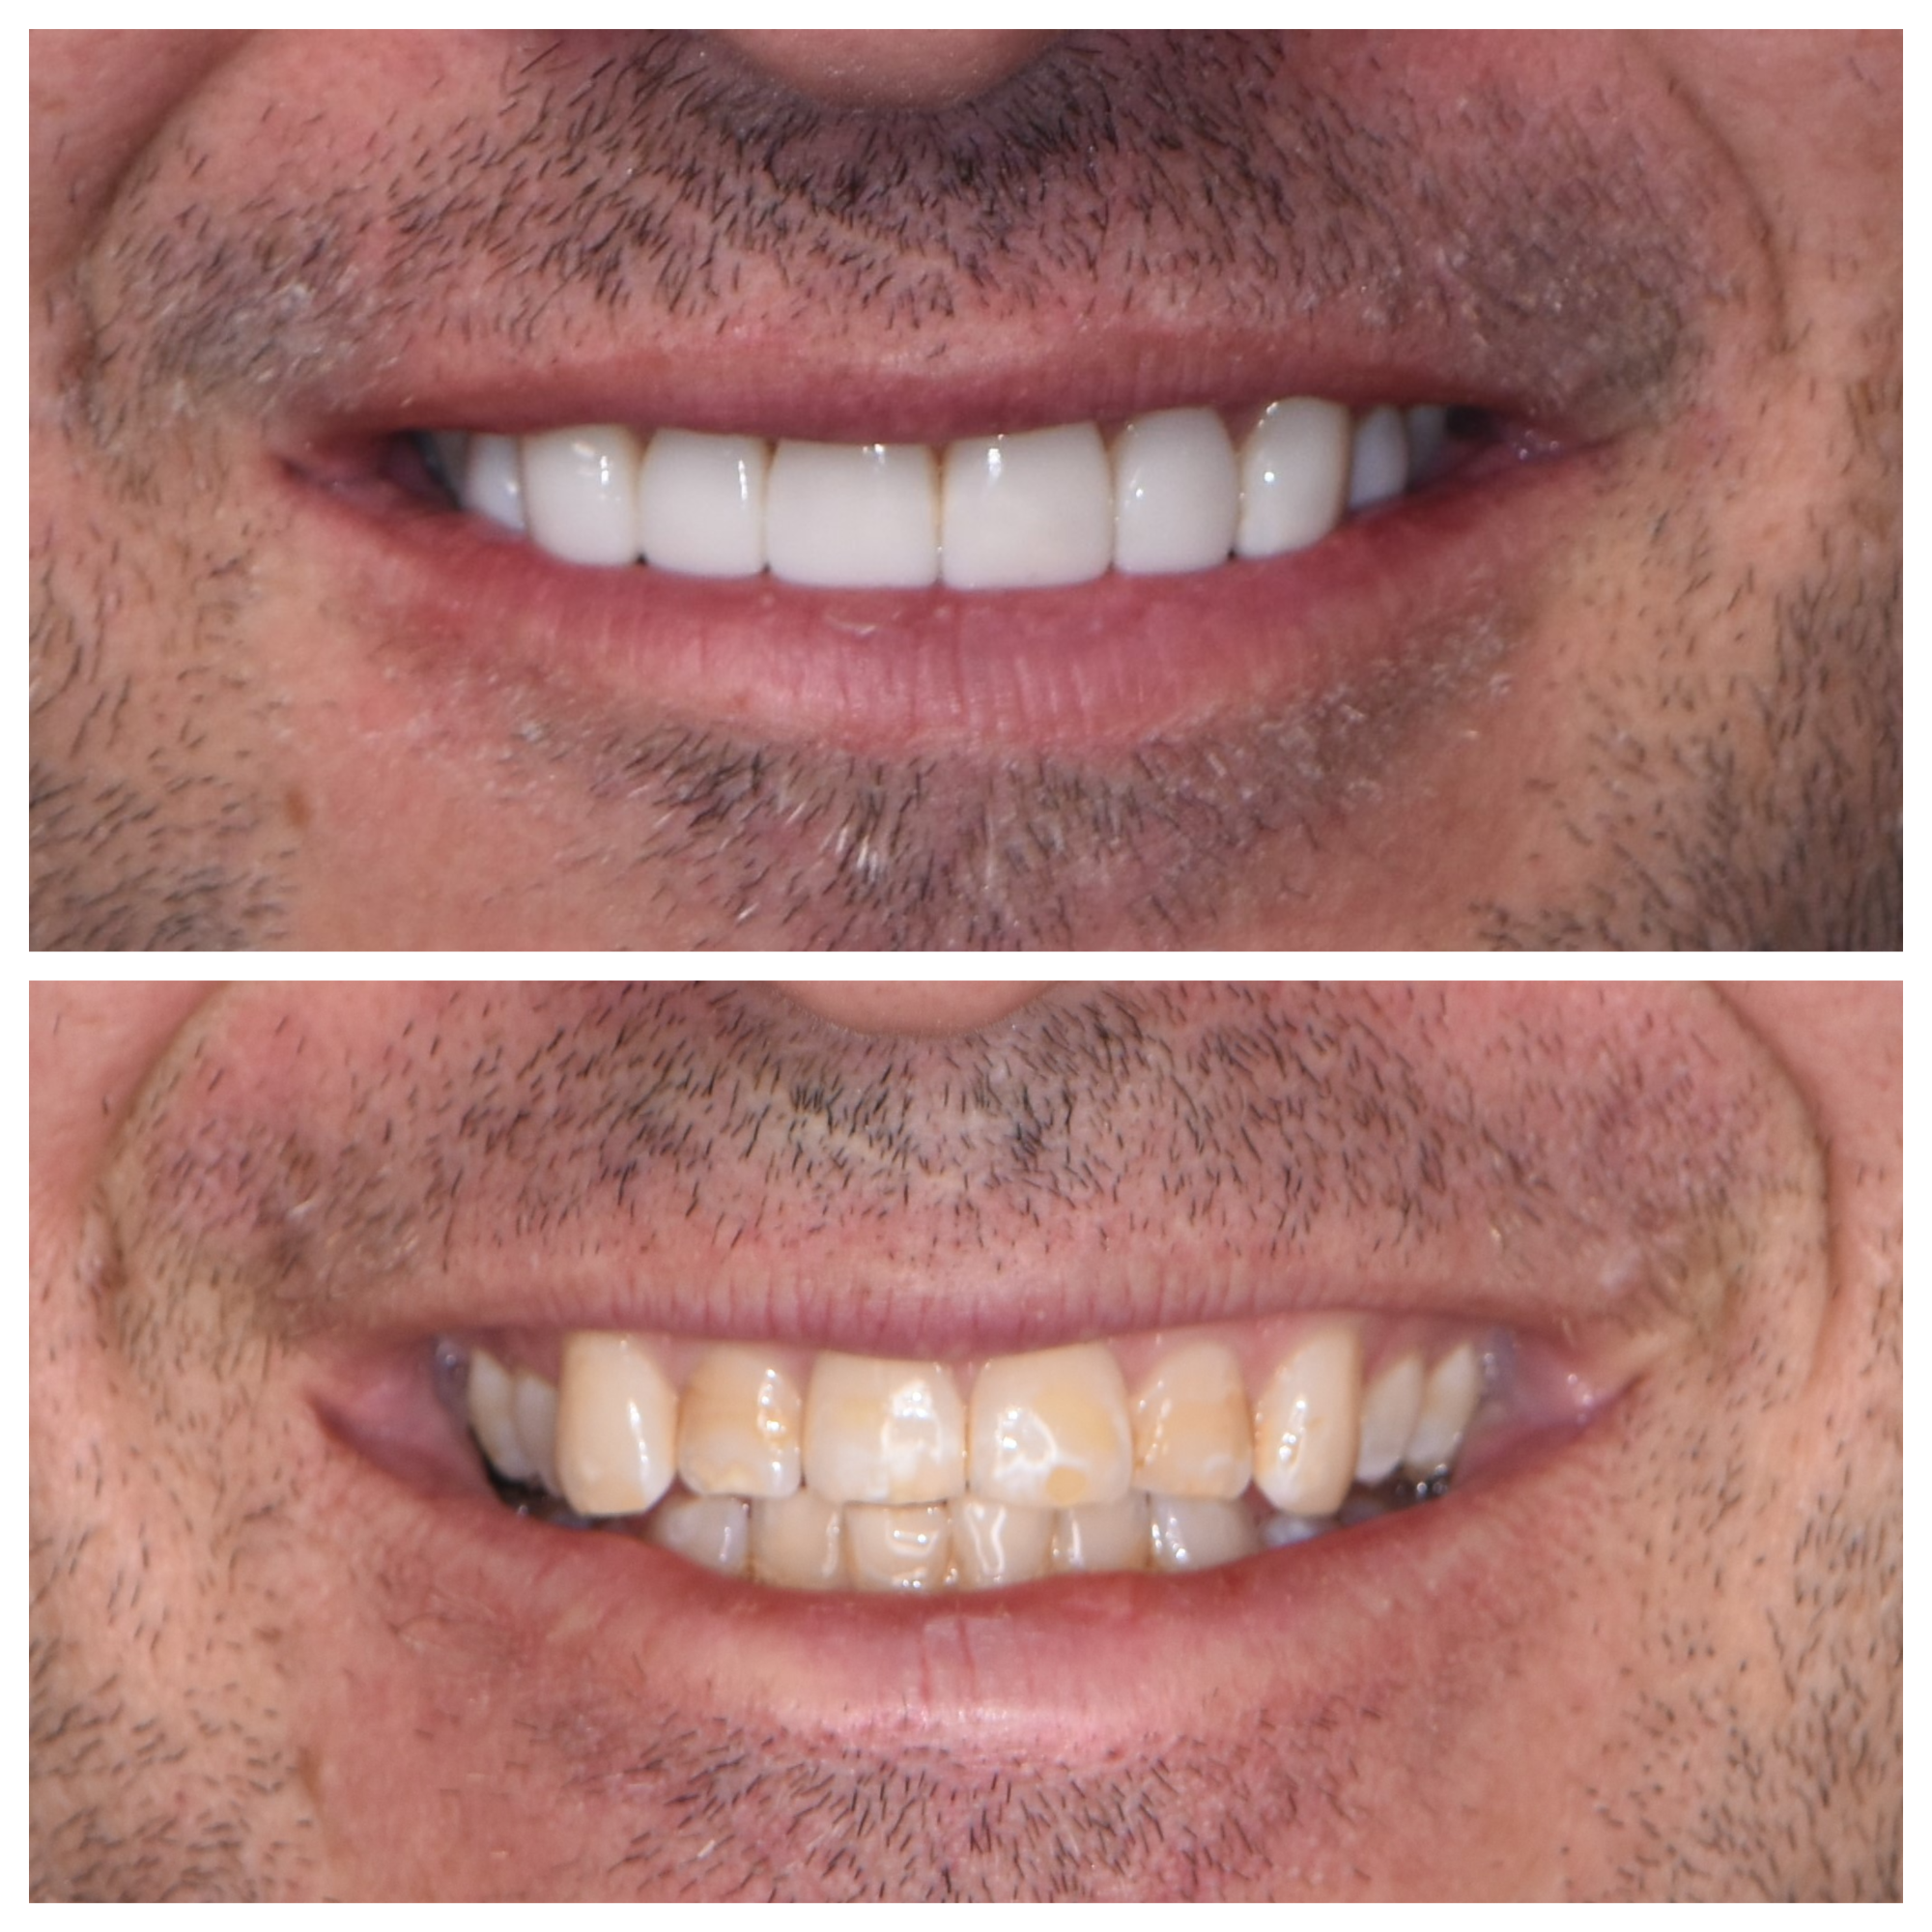 Porcelain veneers will whiten your smile and boost your confidence